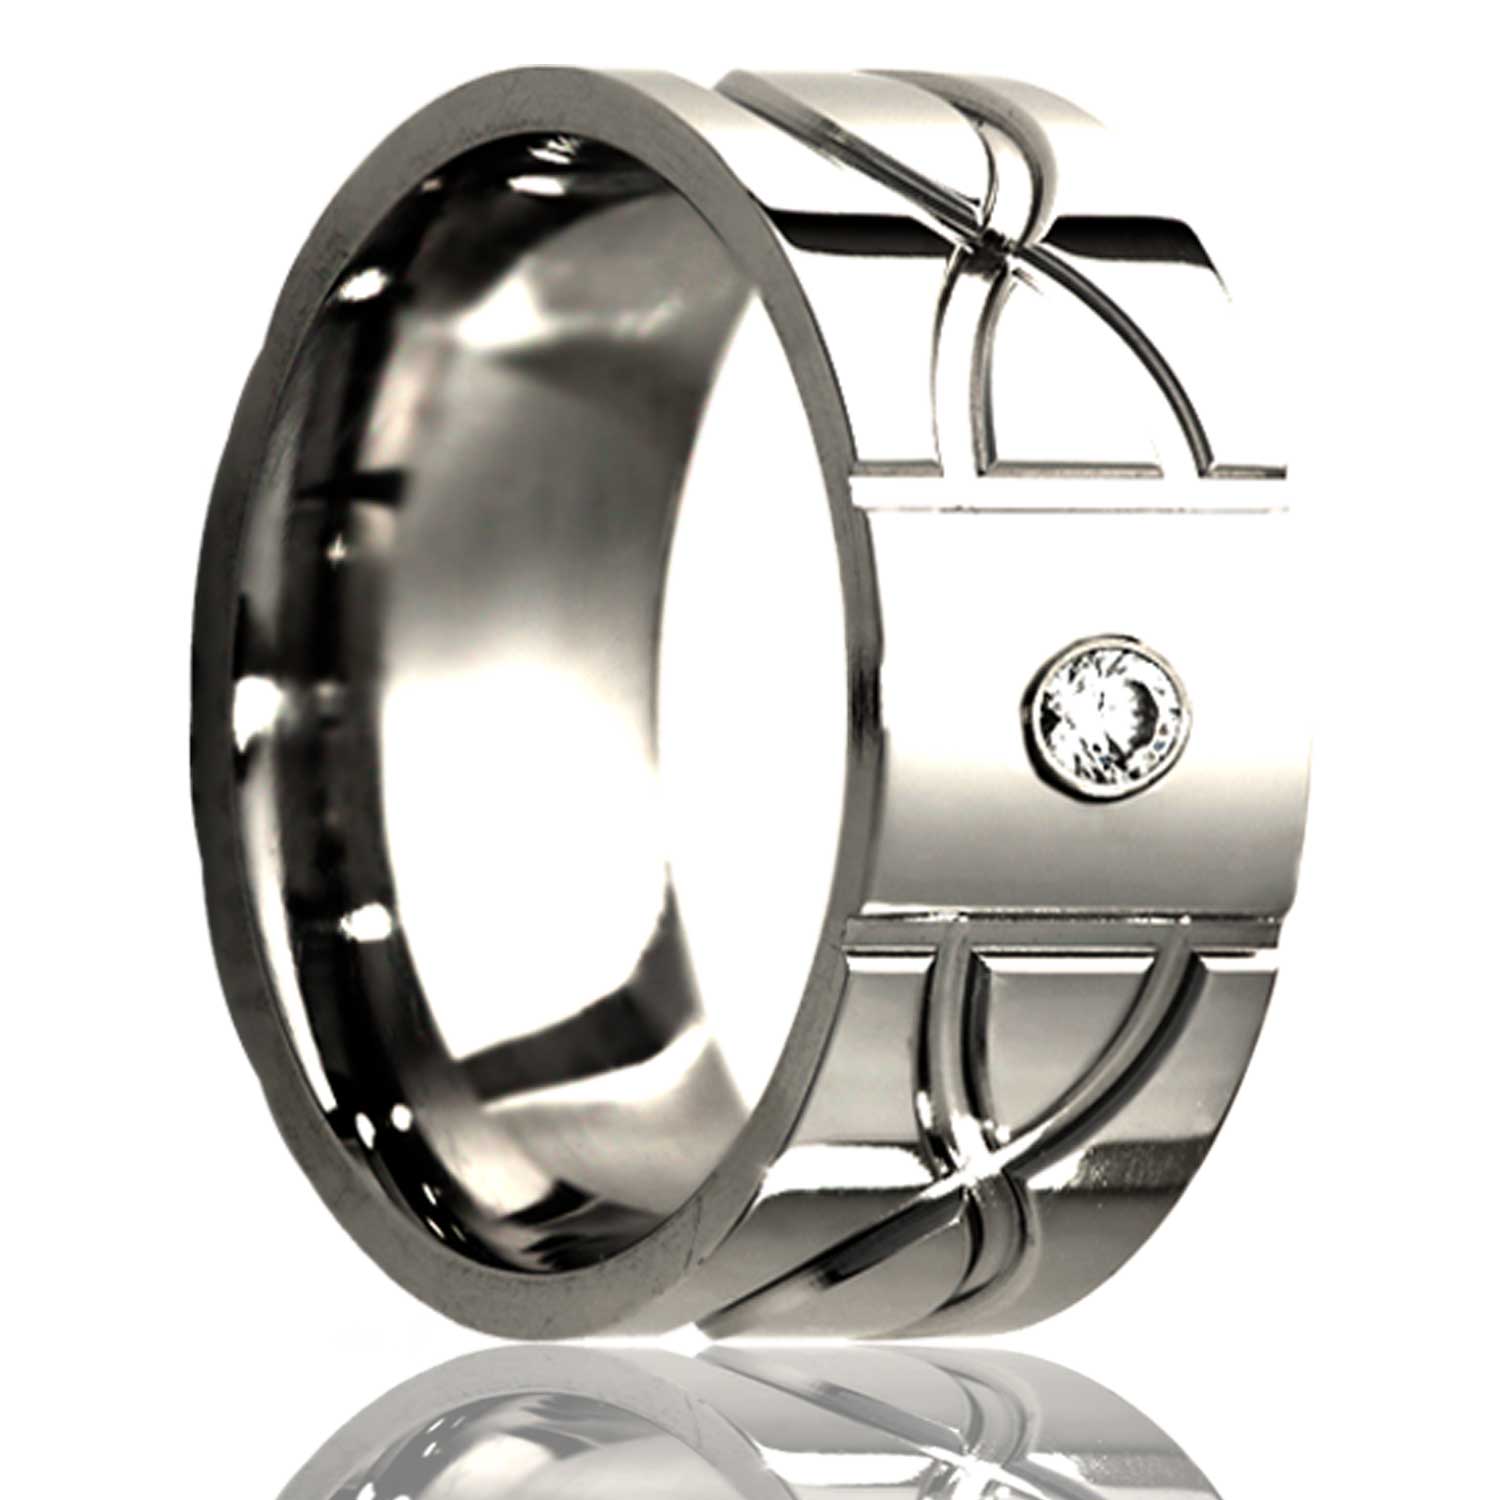 A infinity waves titanium men's wedding band with diamond displayed on a neutral white background.